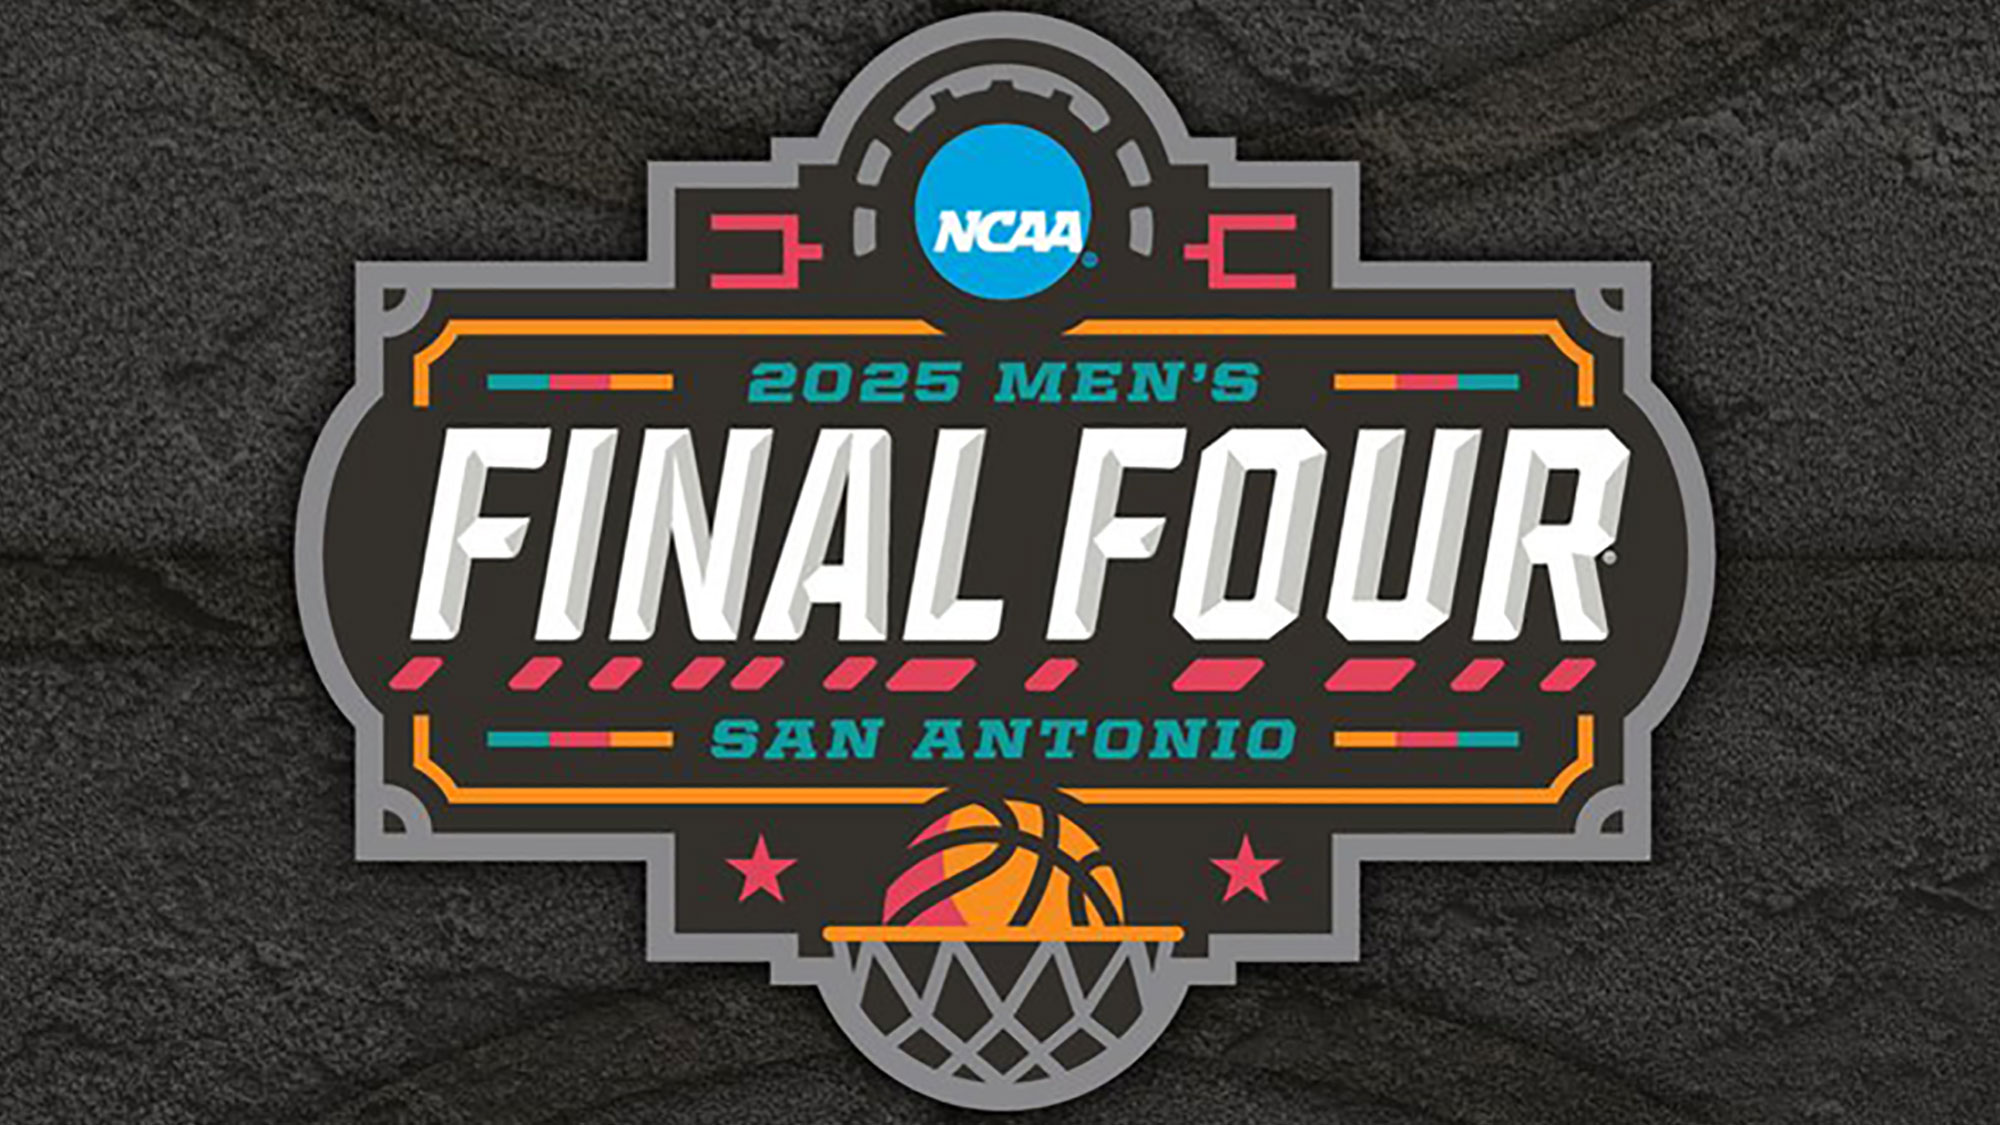 Taking A Look At The Logo For The 2025 Final Four In San Antonio